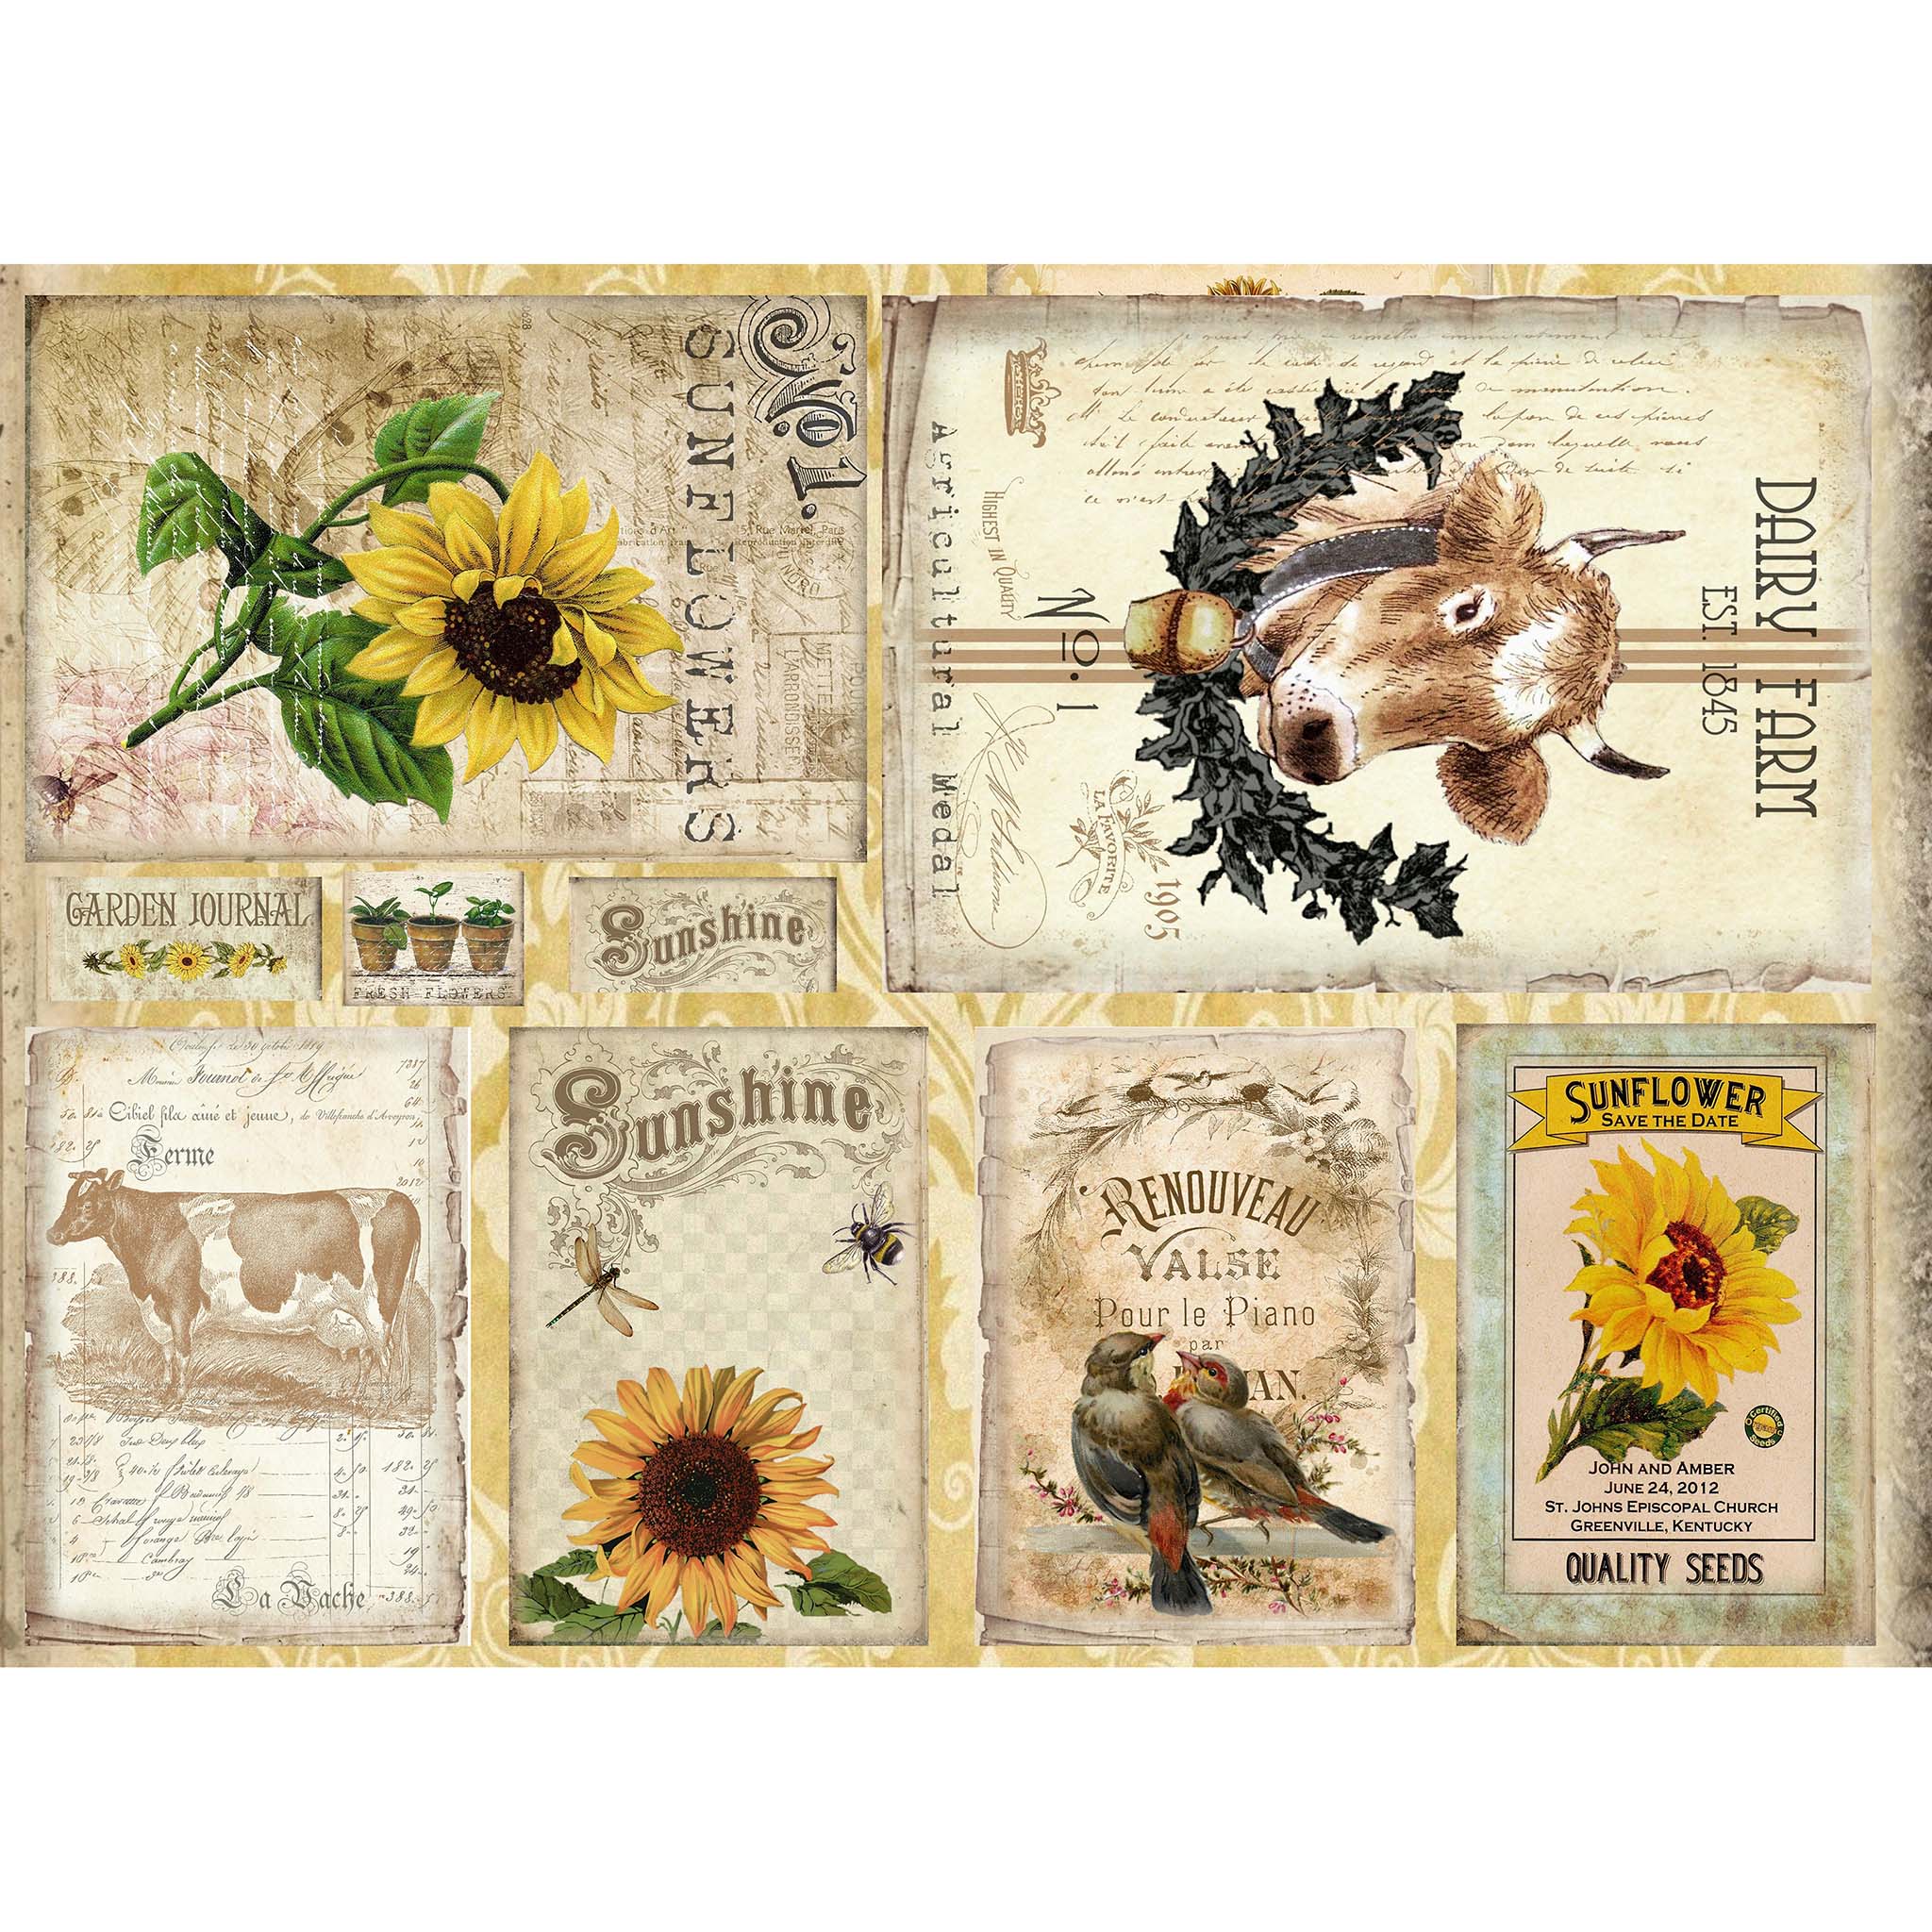 Tissue paper design that features  6 vintage designs of cows, sunflowers, and birds on old farm documents with 3 smaller country images. White borders are on the top and bottom.